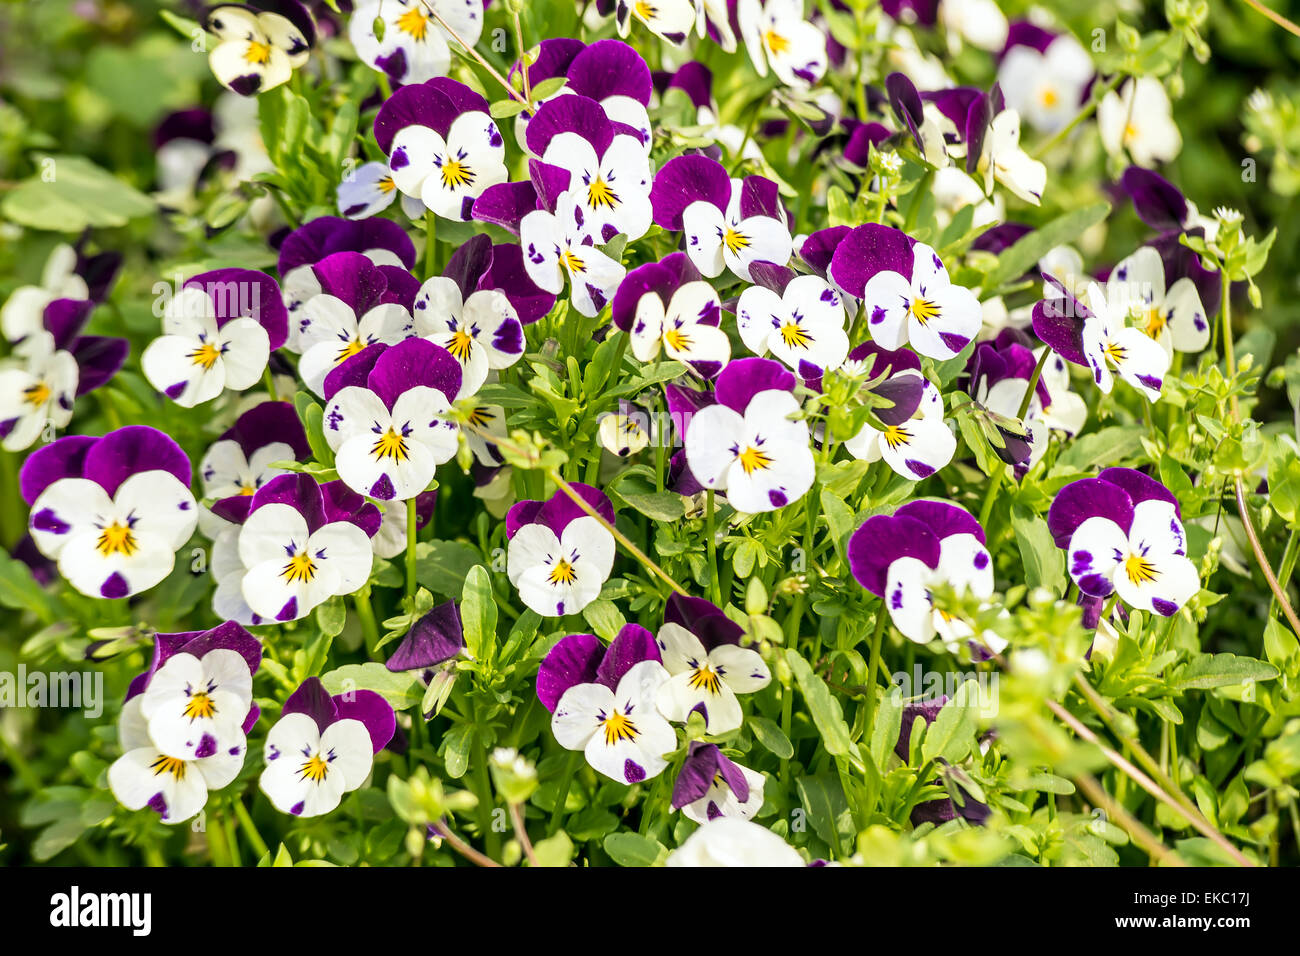 Pansy flowers in garden Stock Photo